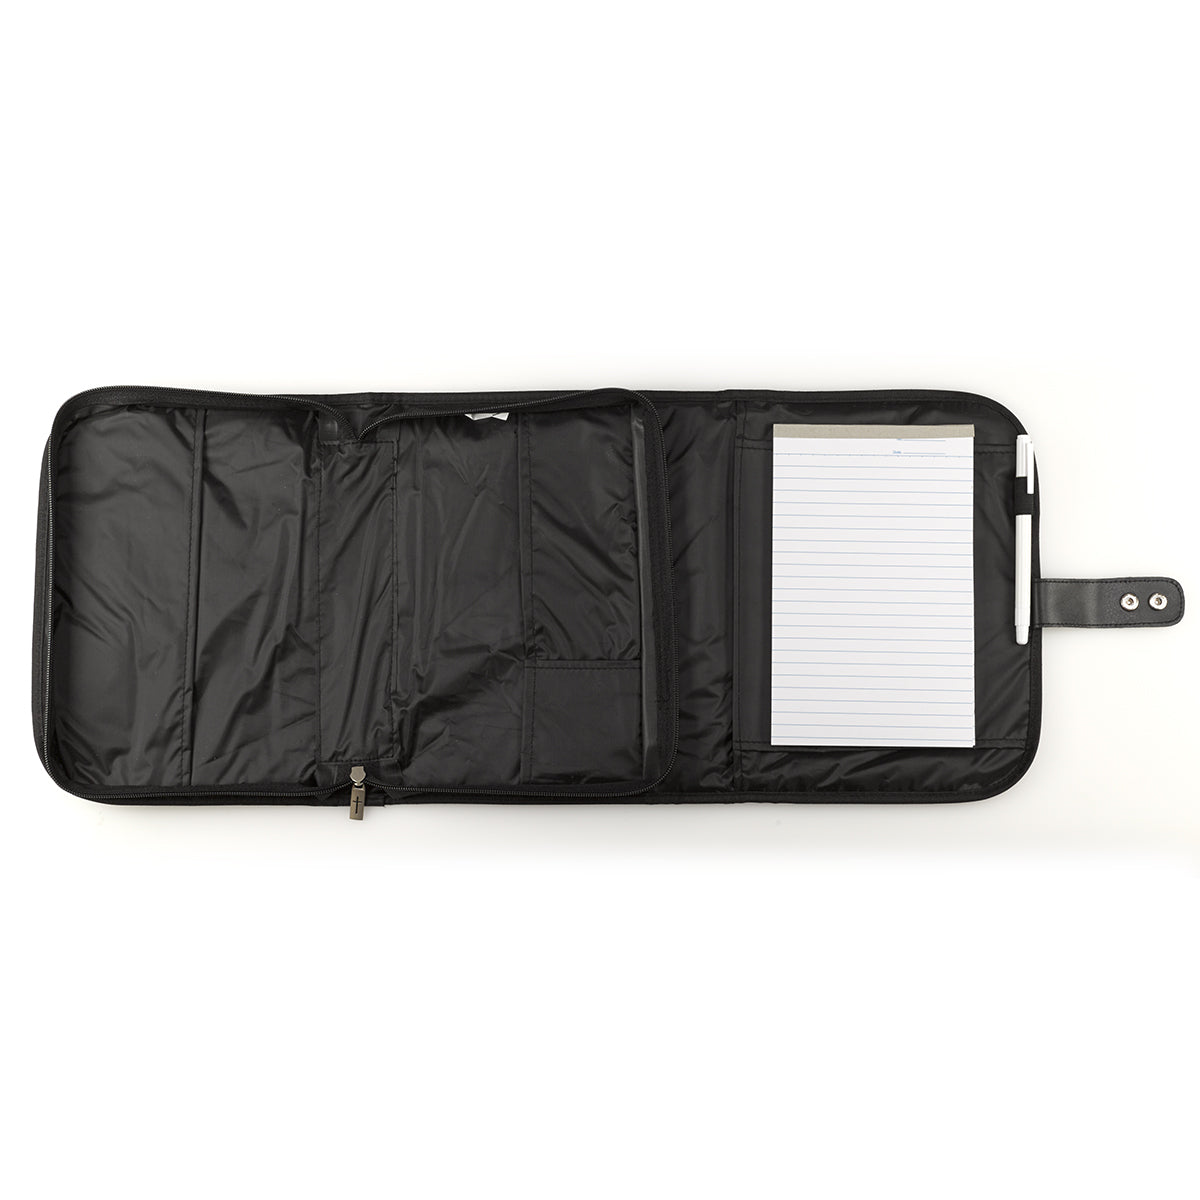 Image of Three-Fold Organizer (Black) Polyester Bible Cover- Medium other